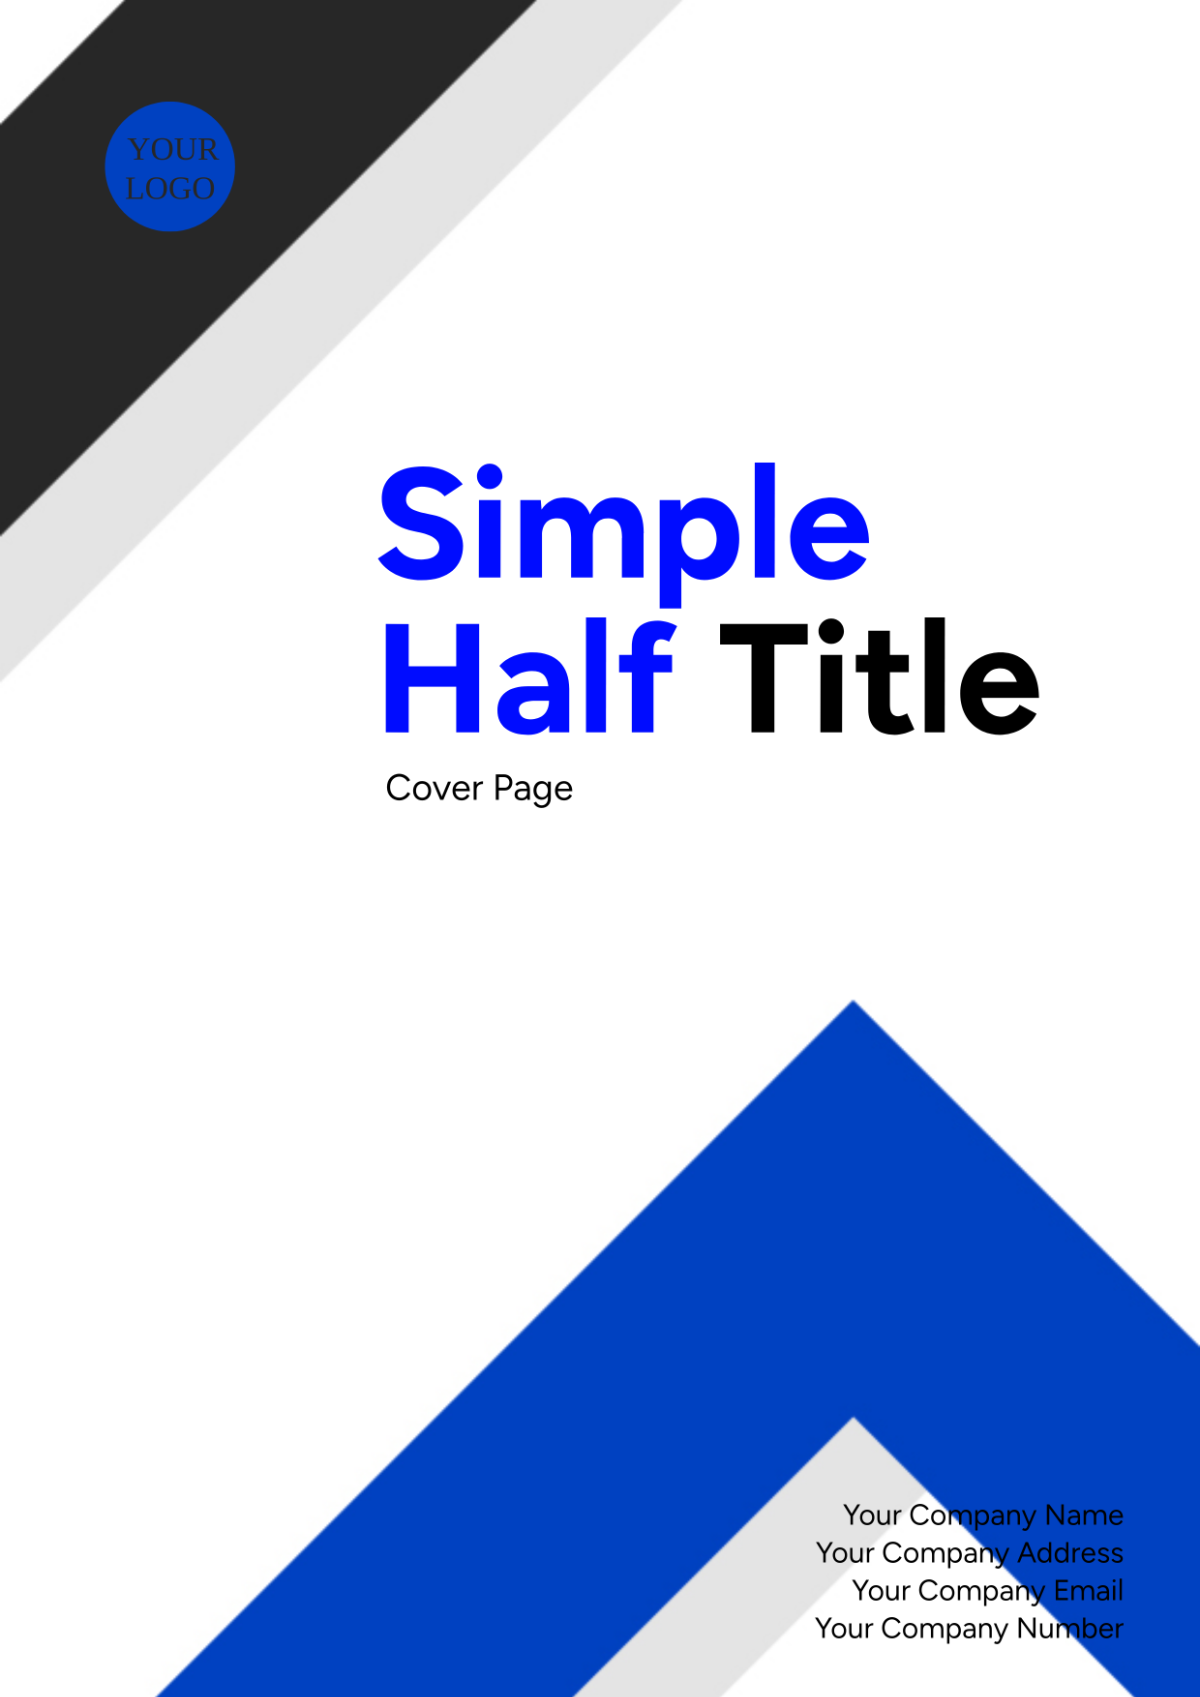 Simple Half Title Cover Page